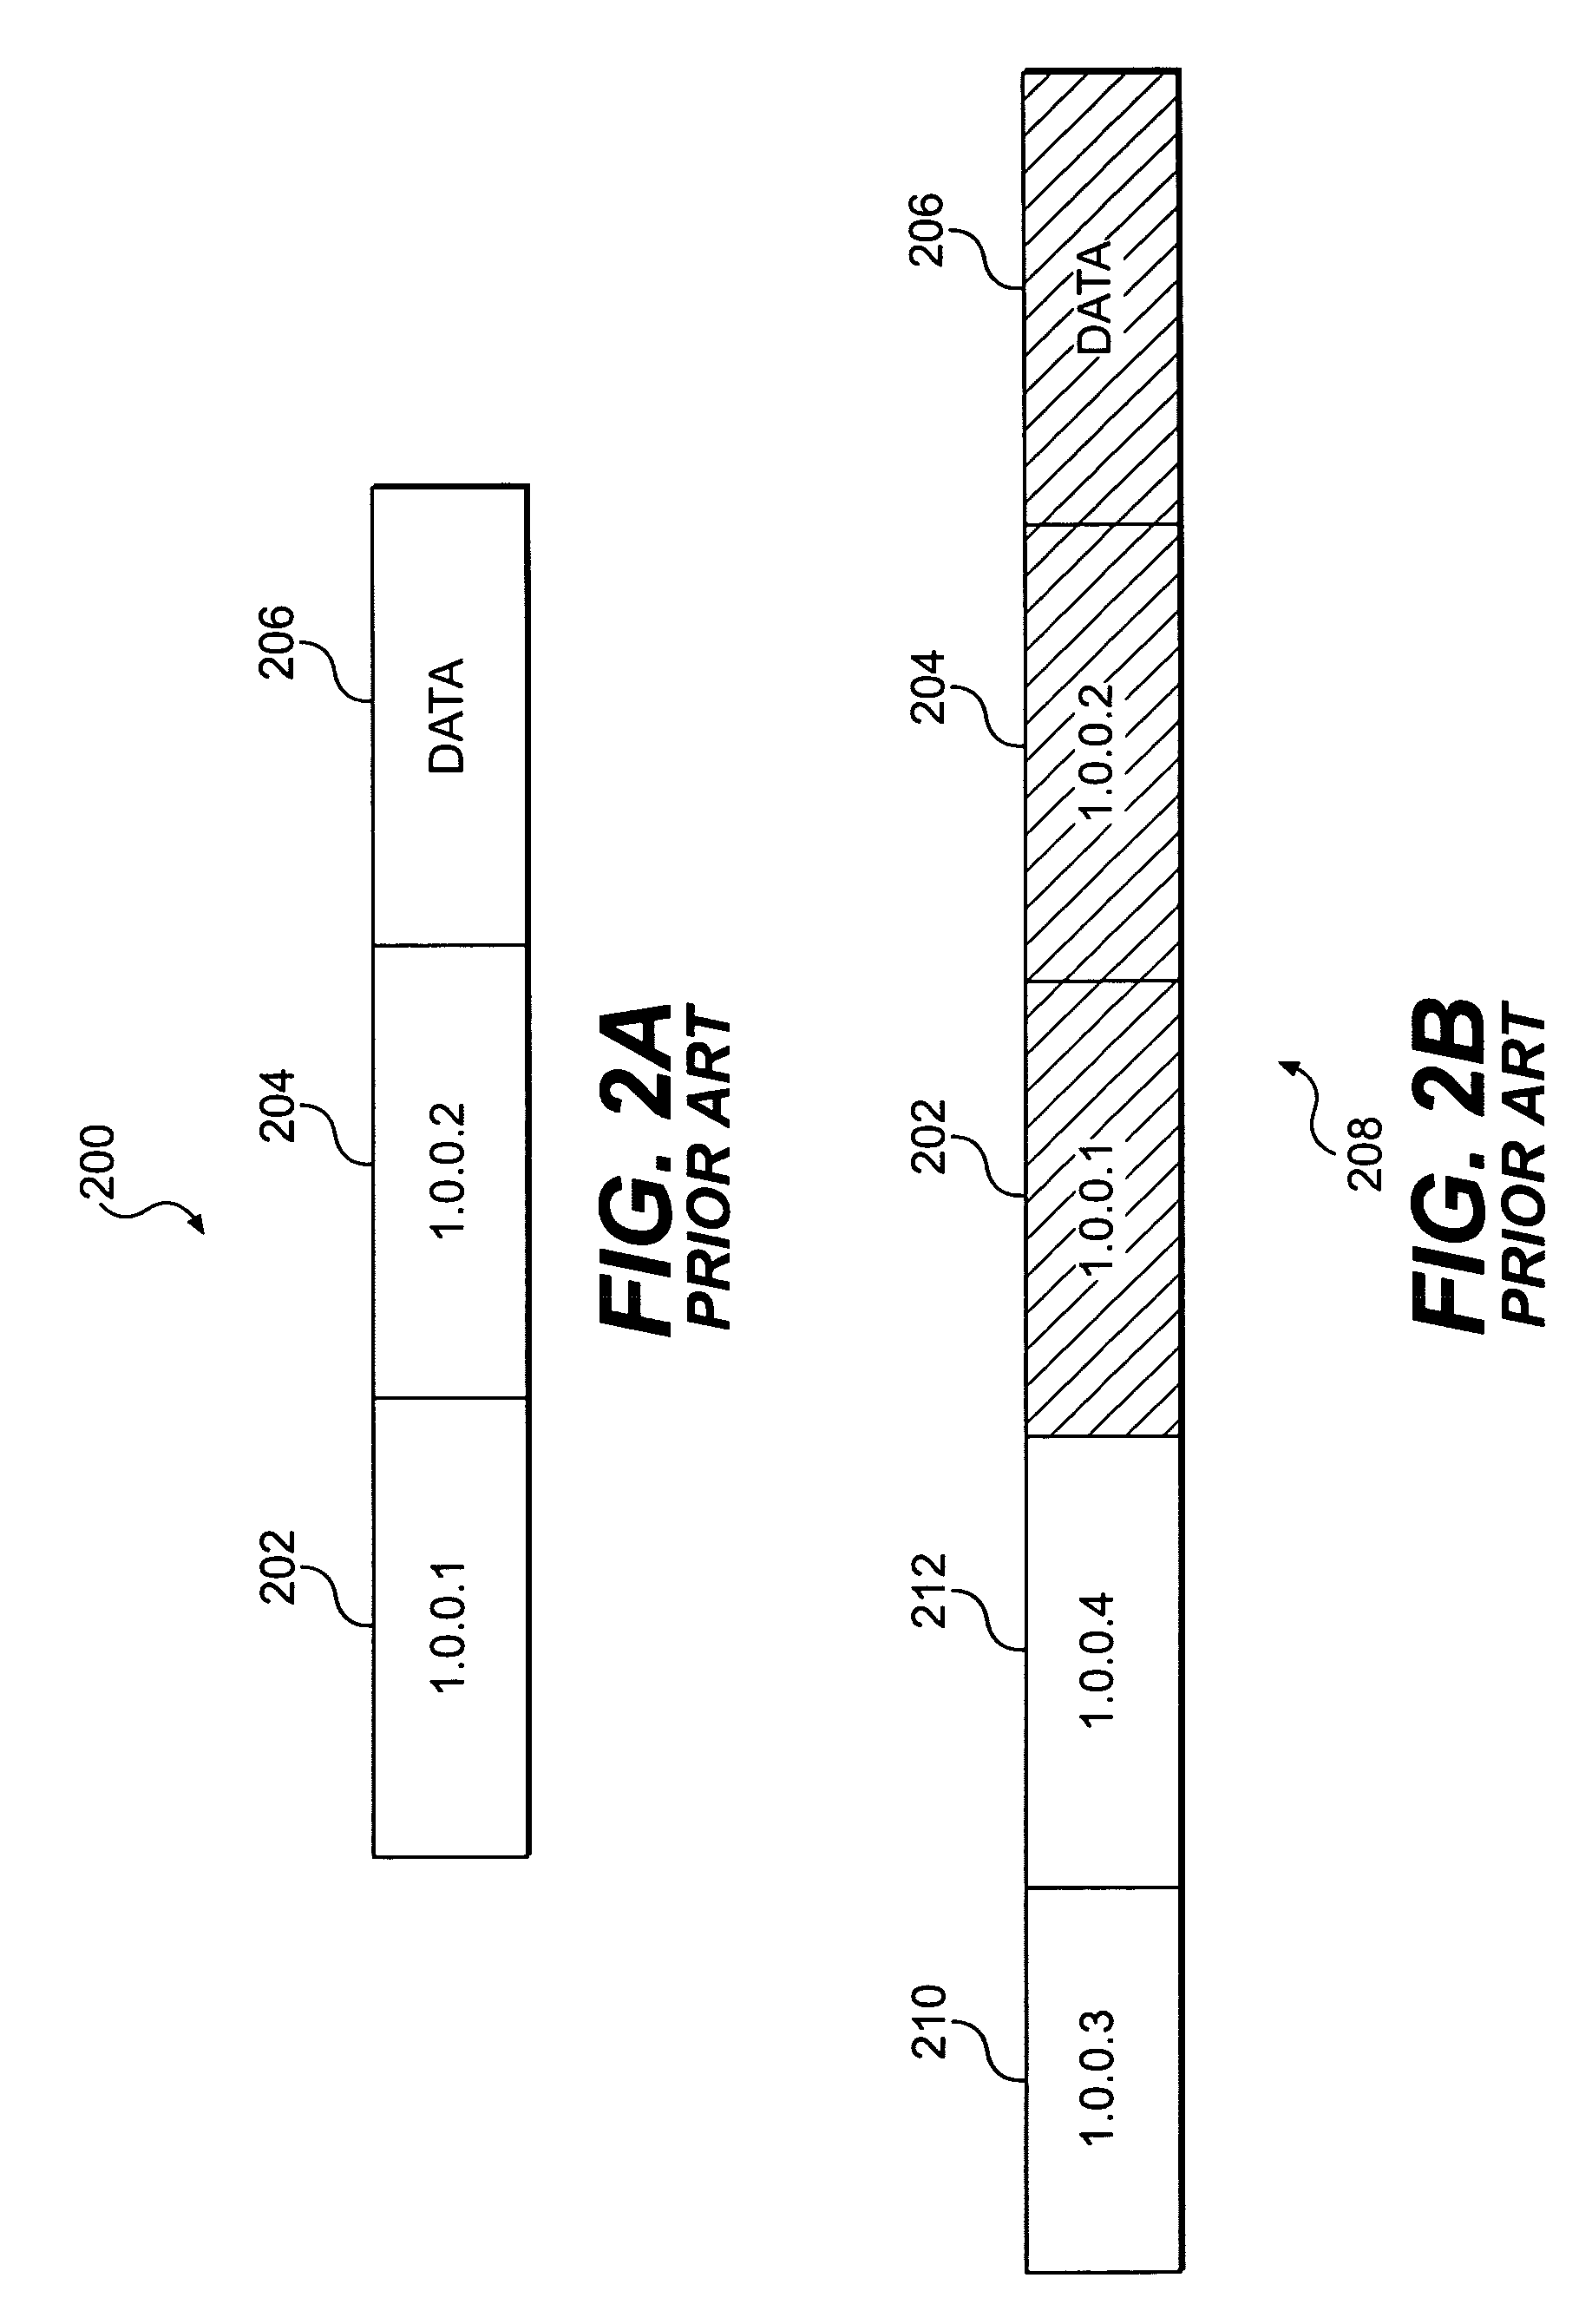 System and method for separating addresses from the delivery scheme in a virtual private network